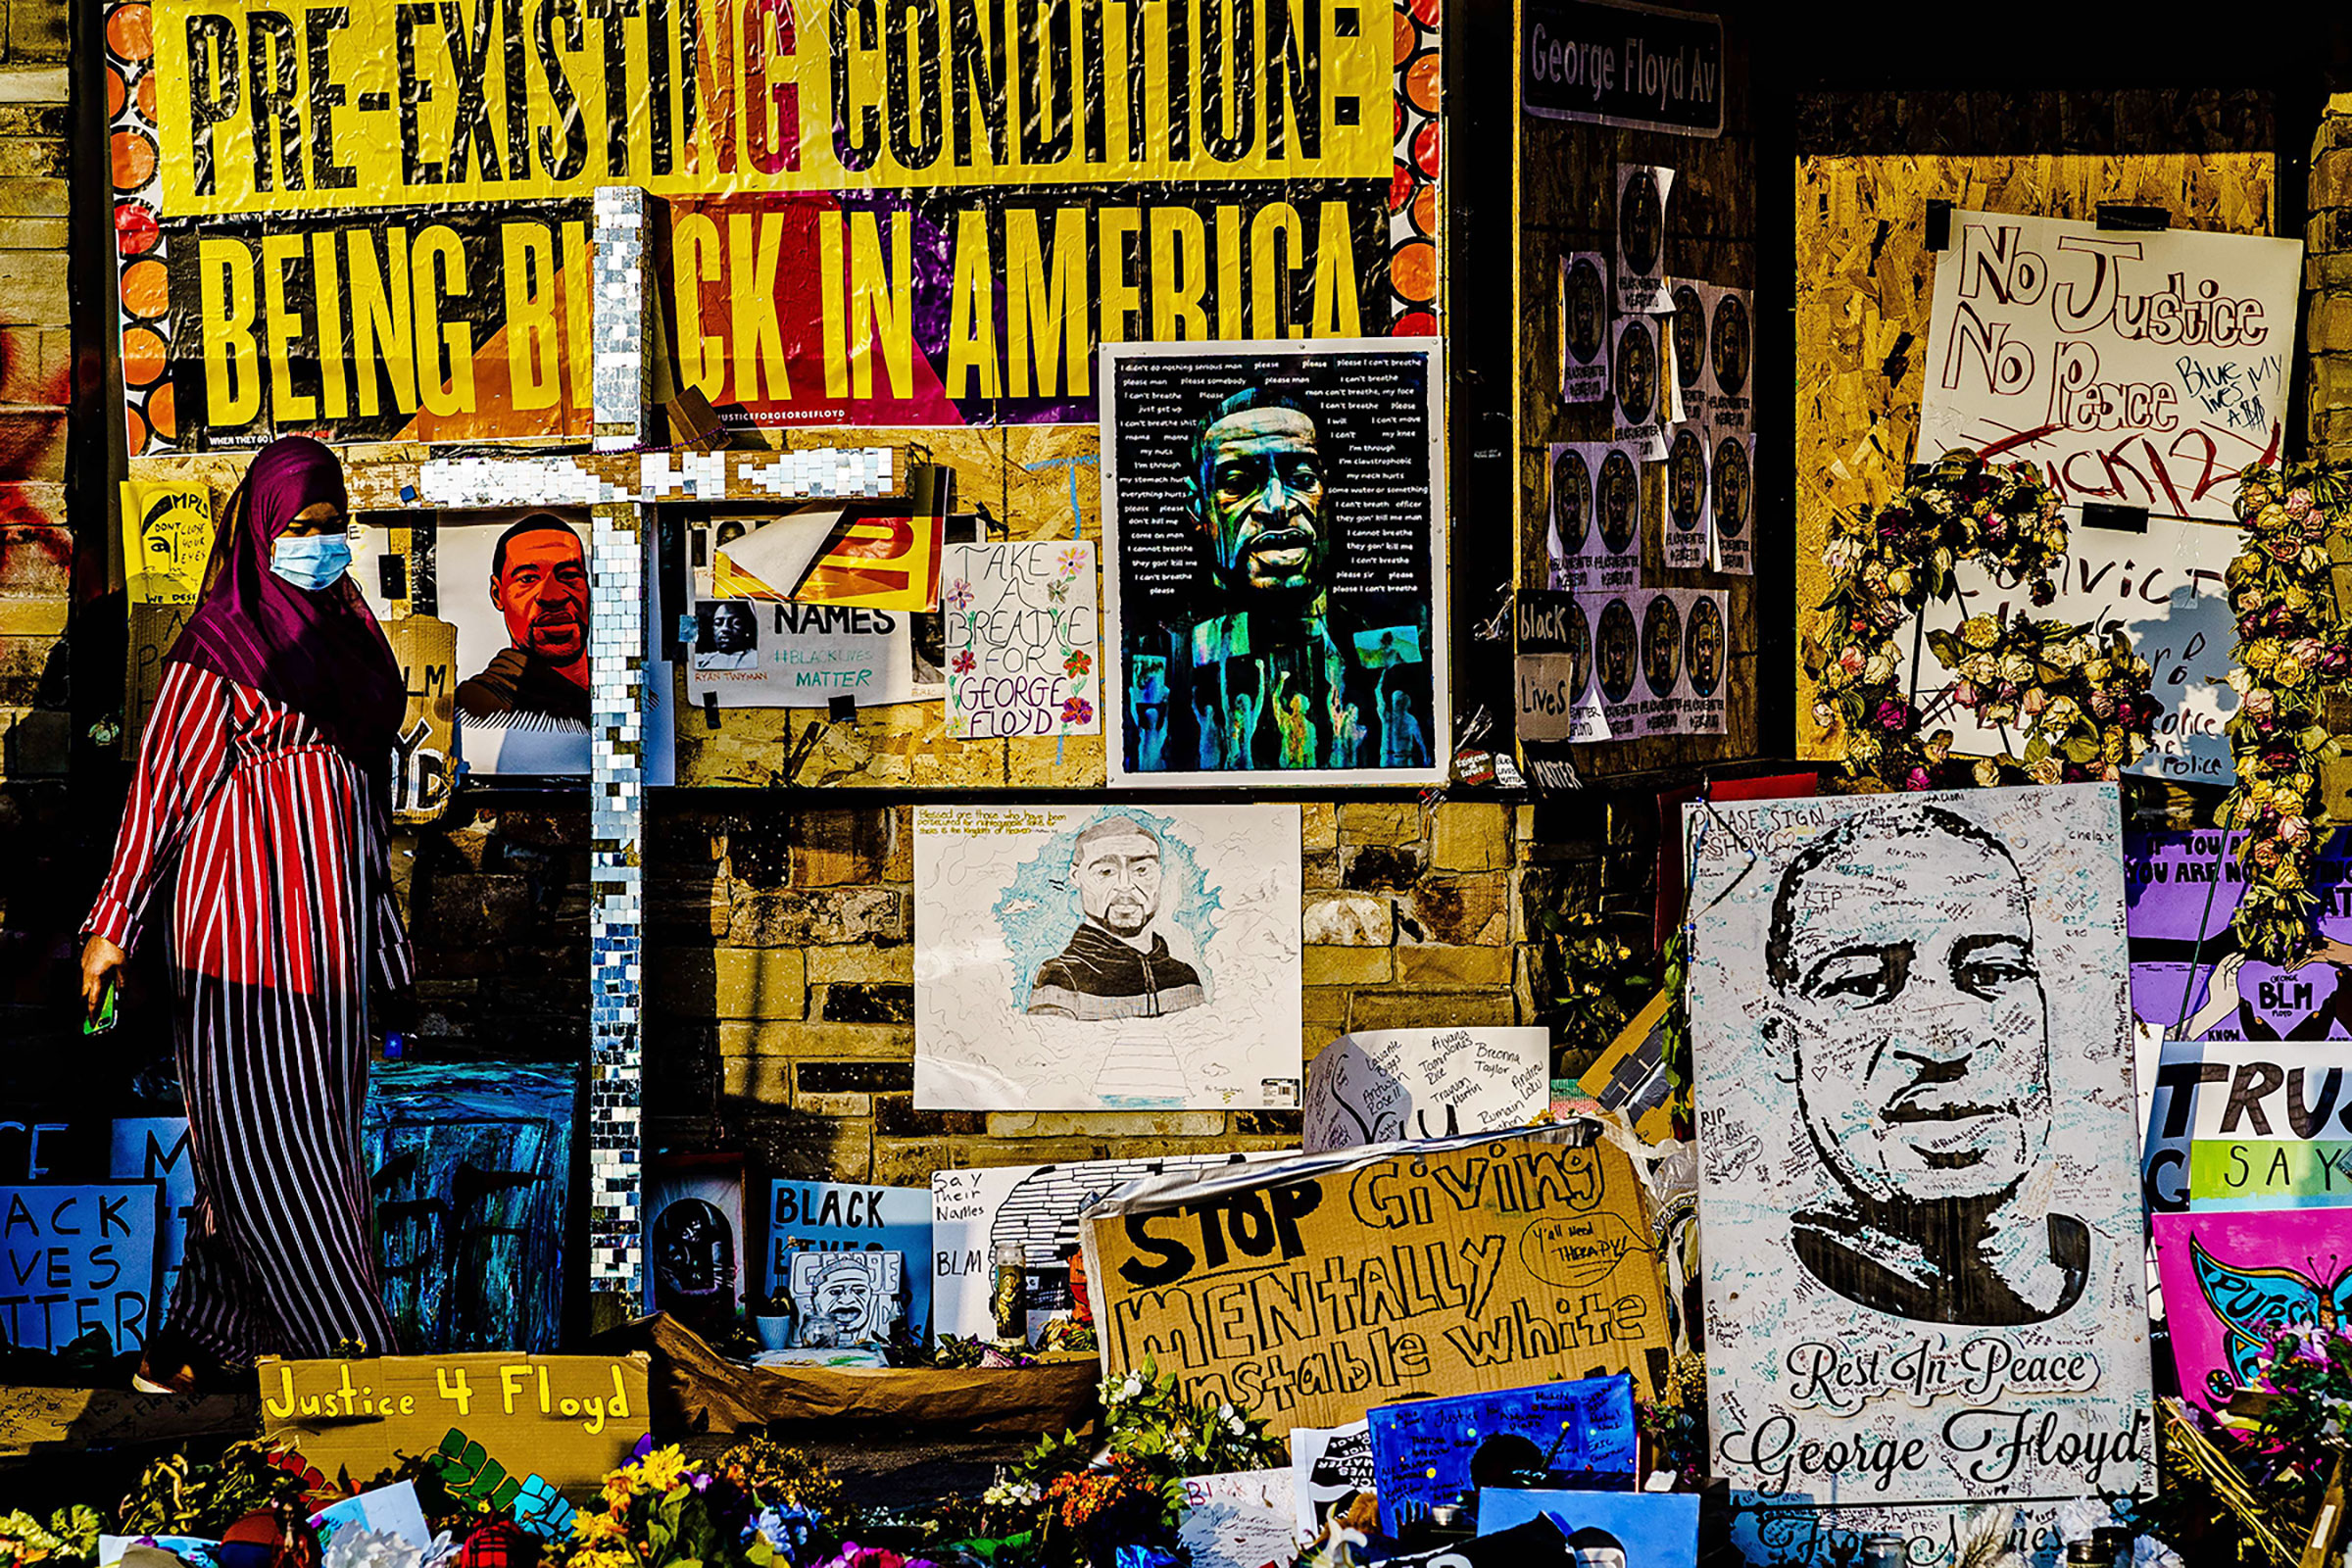 A memorial to George Floyd on June 13 near the site where Floyd died in Minneapolis (Kerem Yucel—AFP/Getty Images)